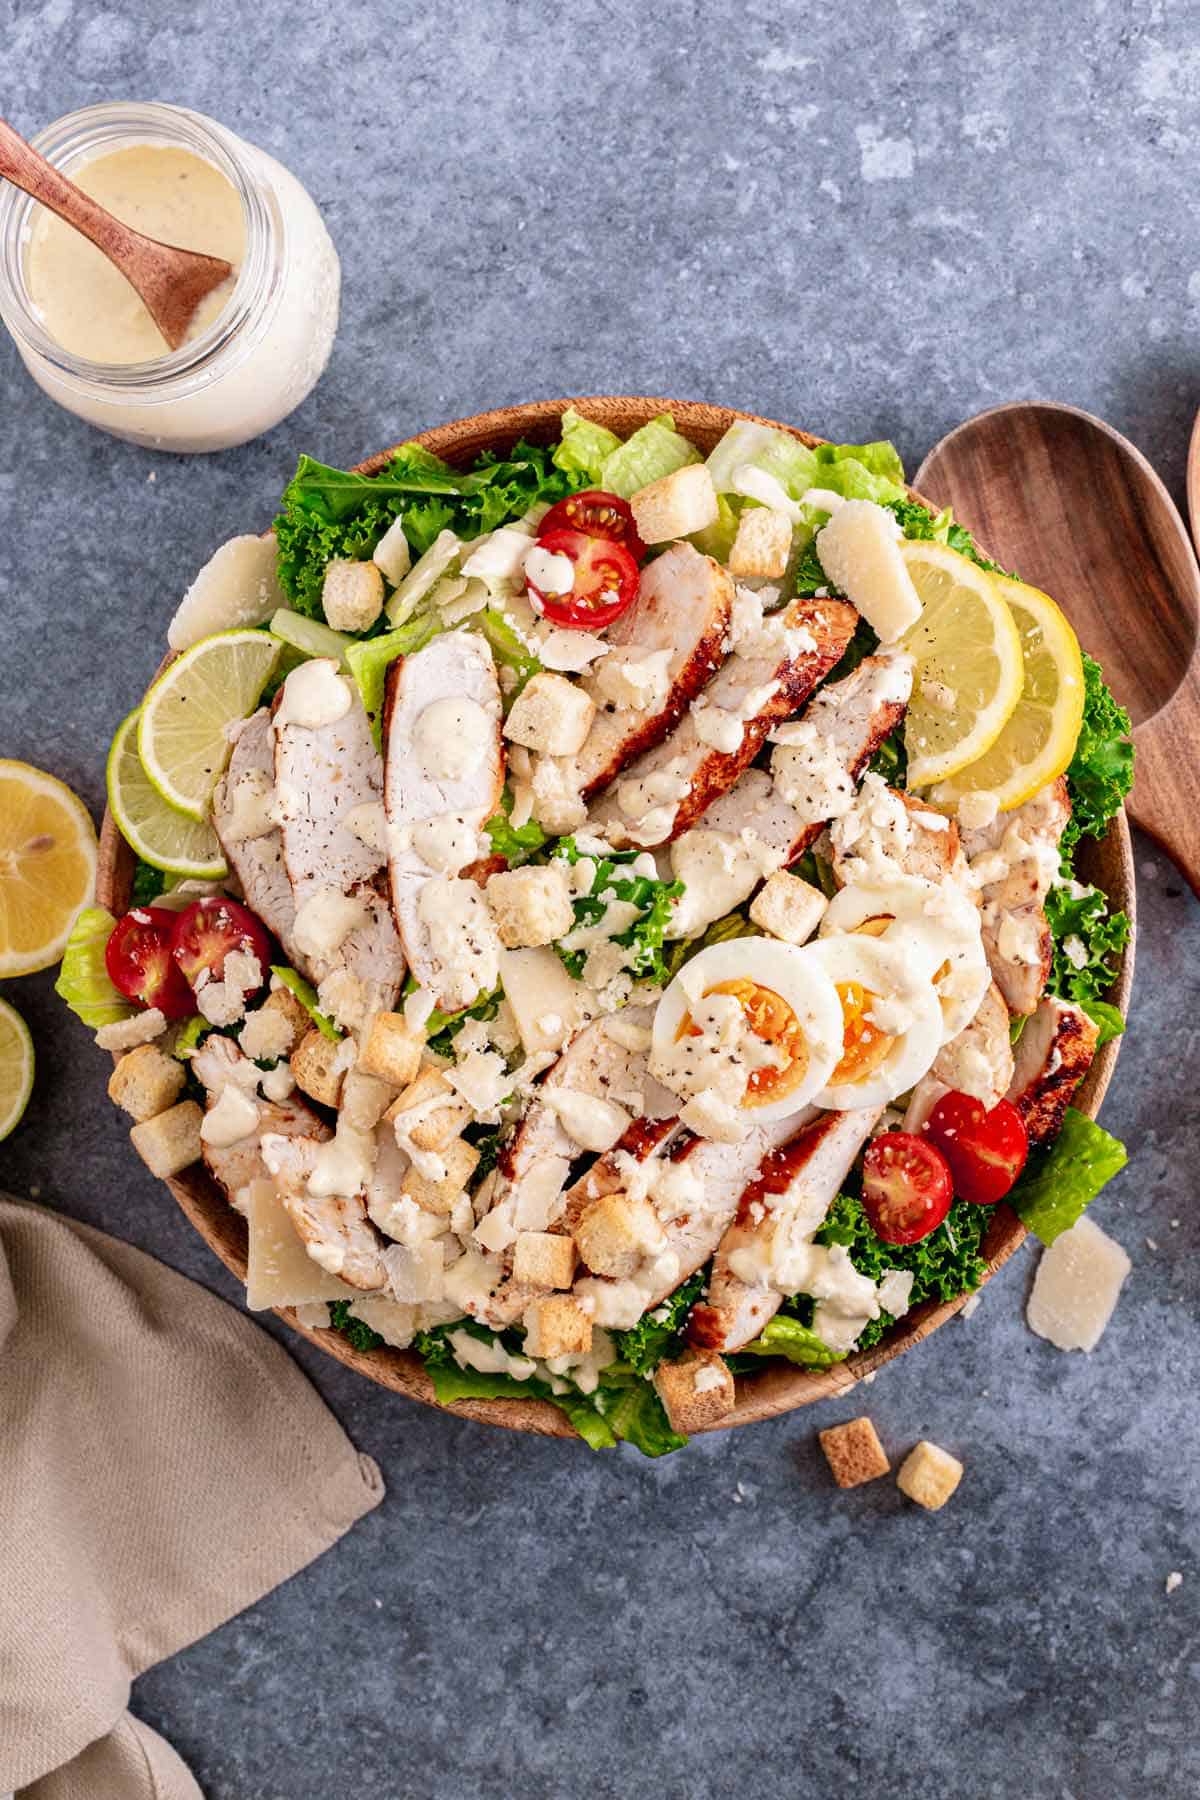 Lemon Kale Caesar Salad with chicken in a white bowl